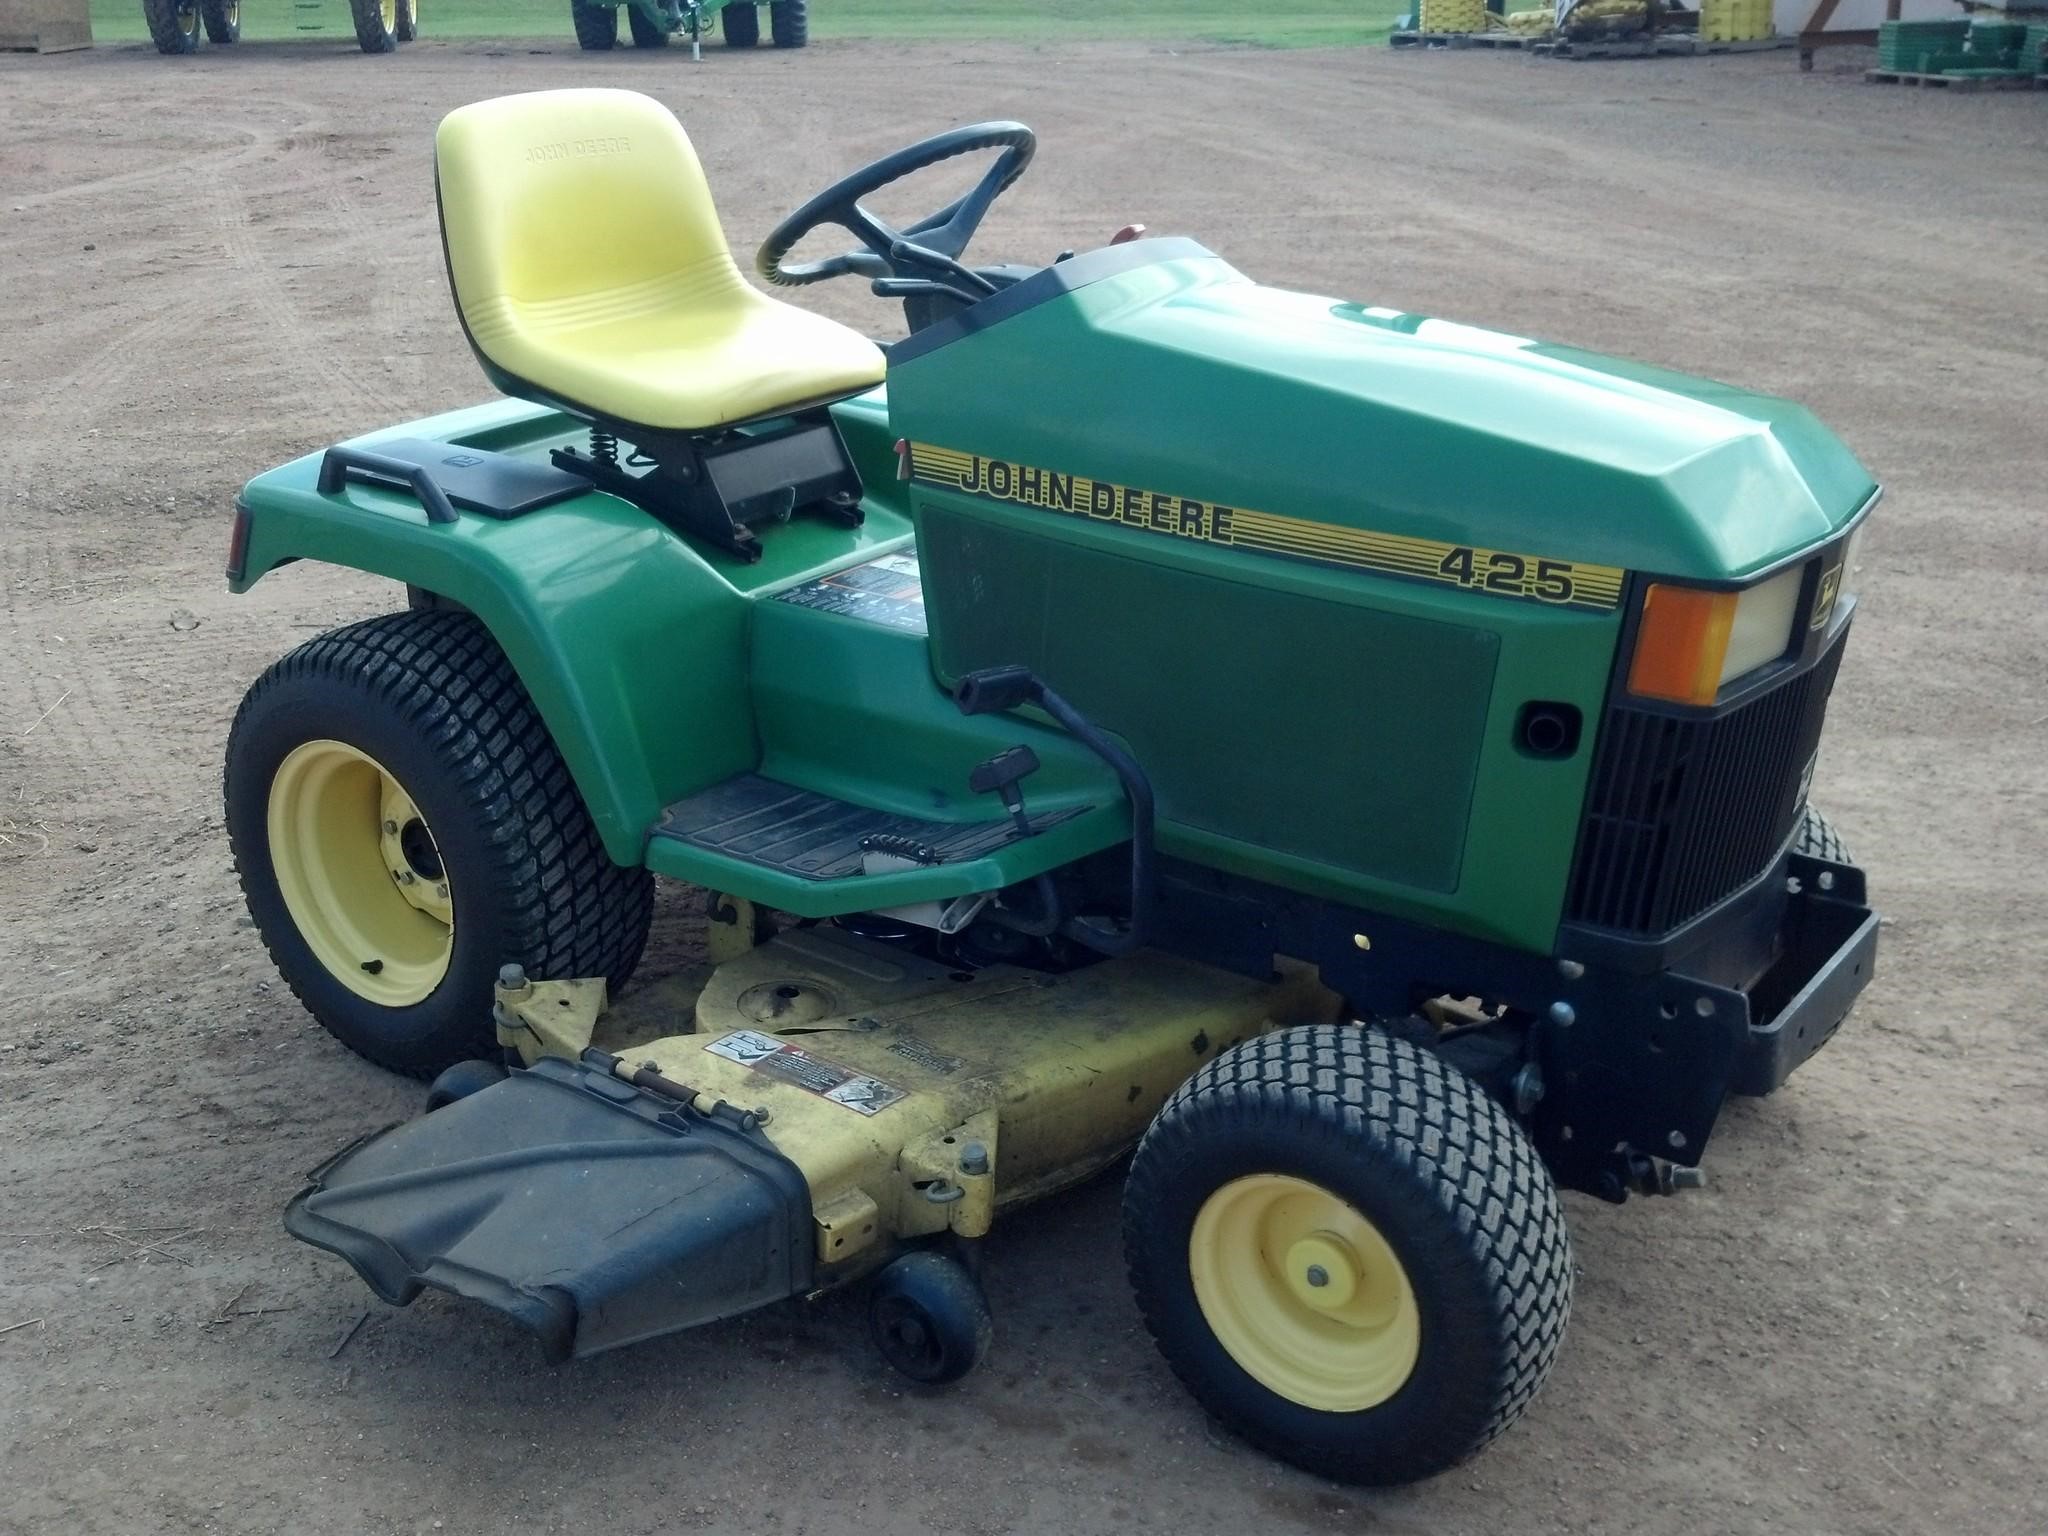 Wisconsin Ag Connection - JOHN DEERE 425 Riding Lawn ...